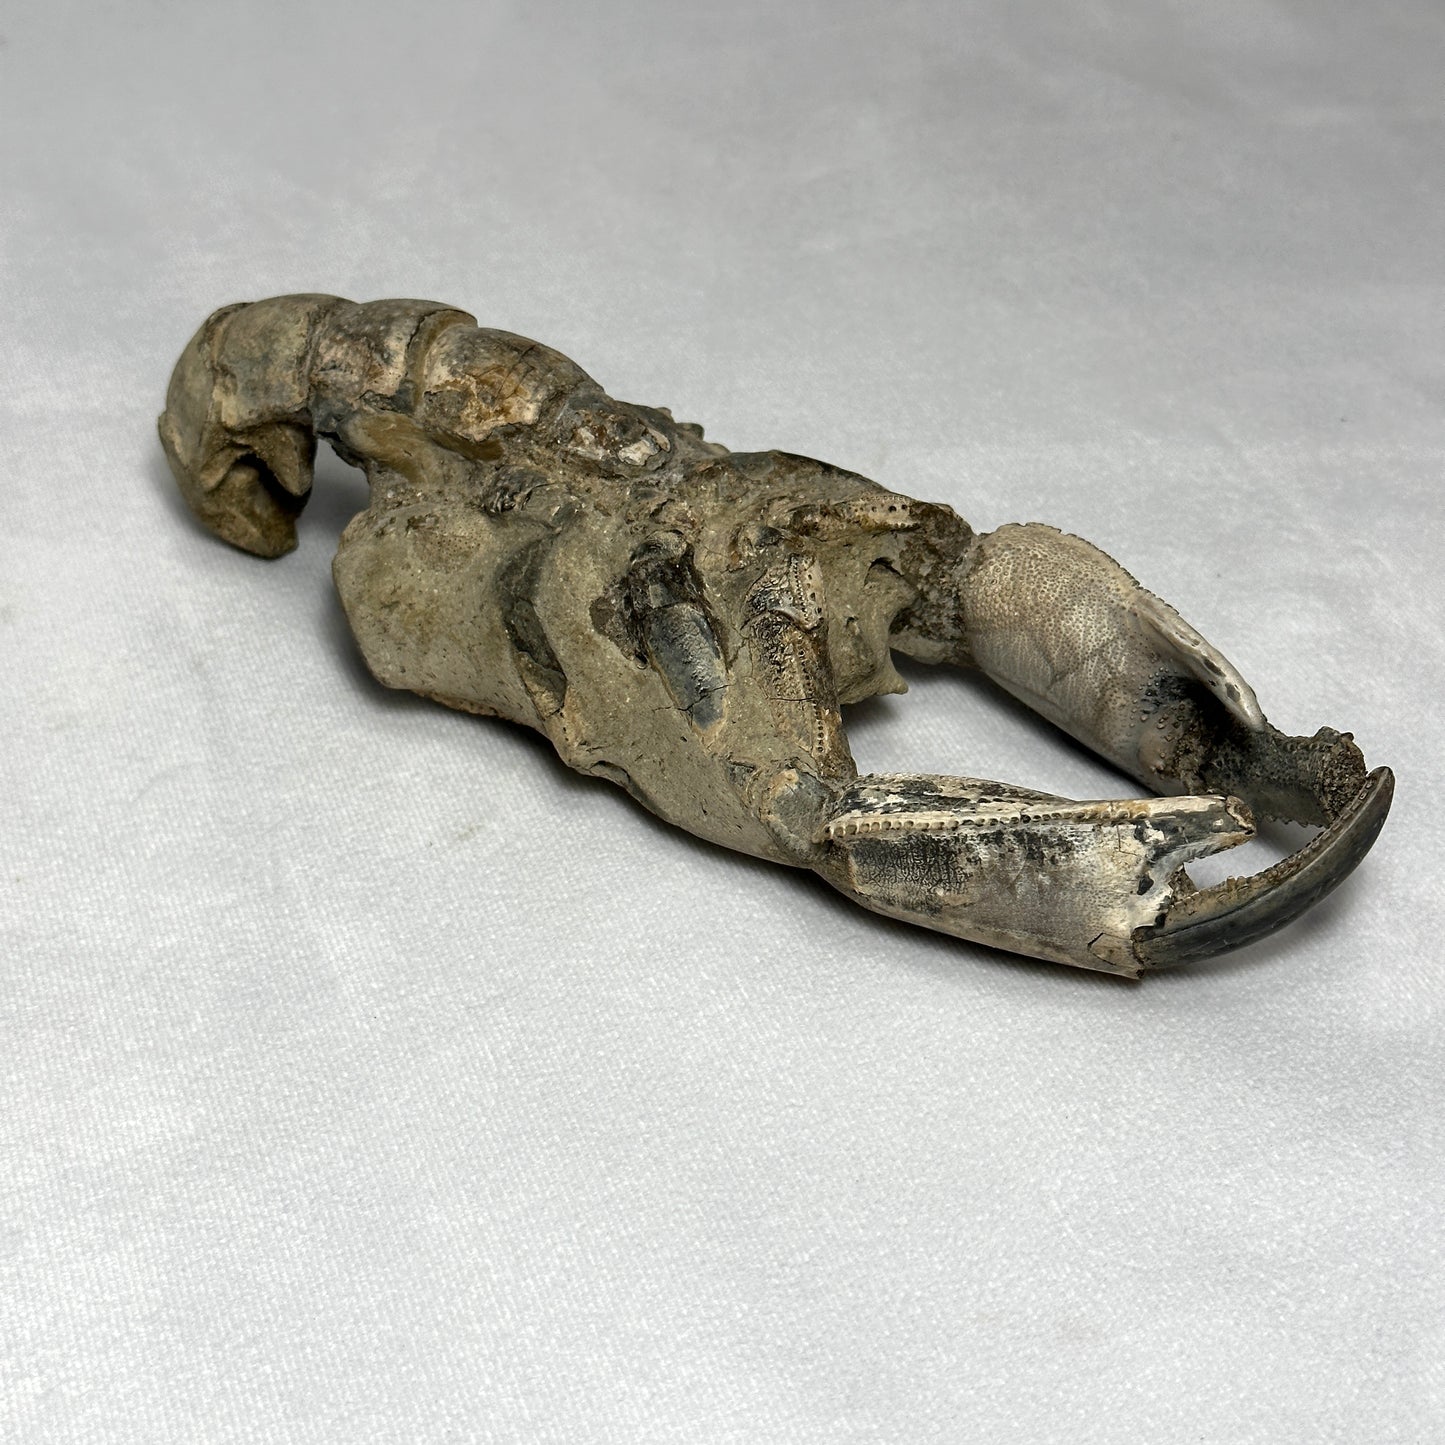 Lovely Indonesian Fossilized Lobster